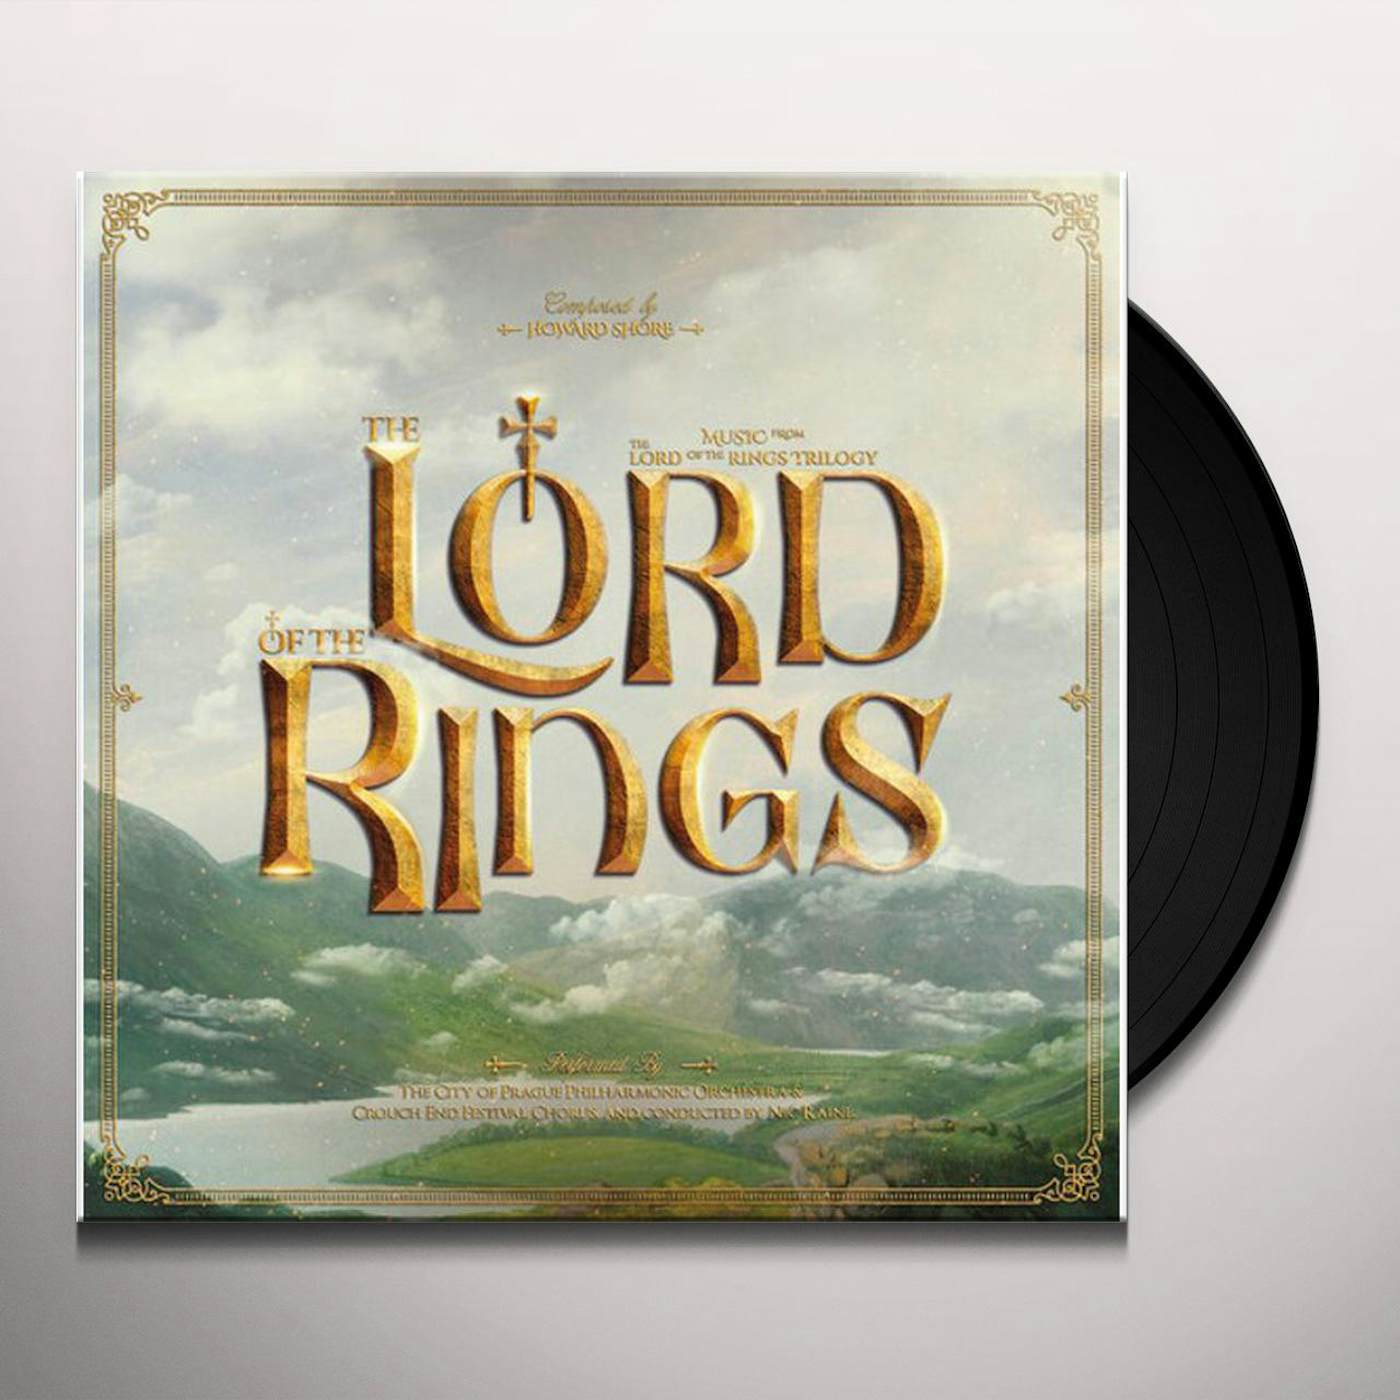 The City of Prague Philharmonic Orchestra Lord Of The Rings Trilogy Vinyl Record